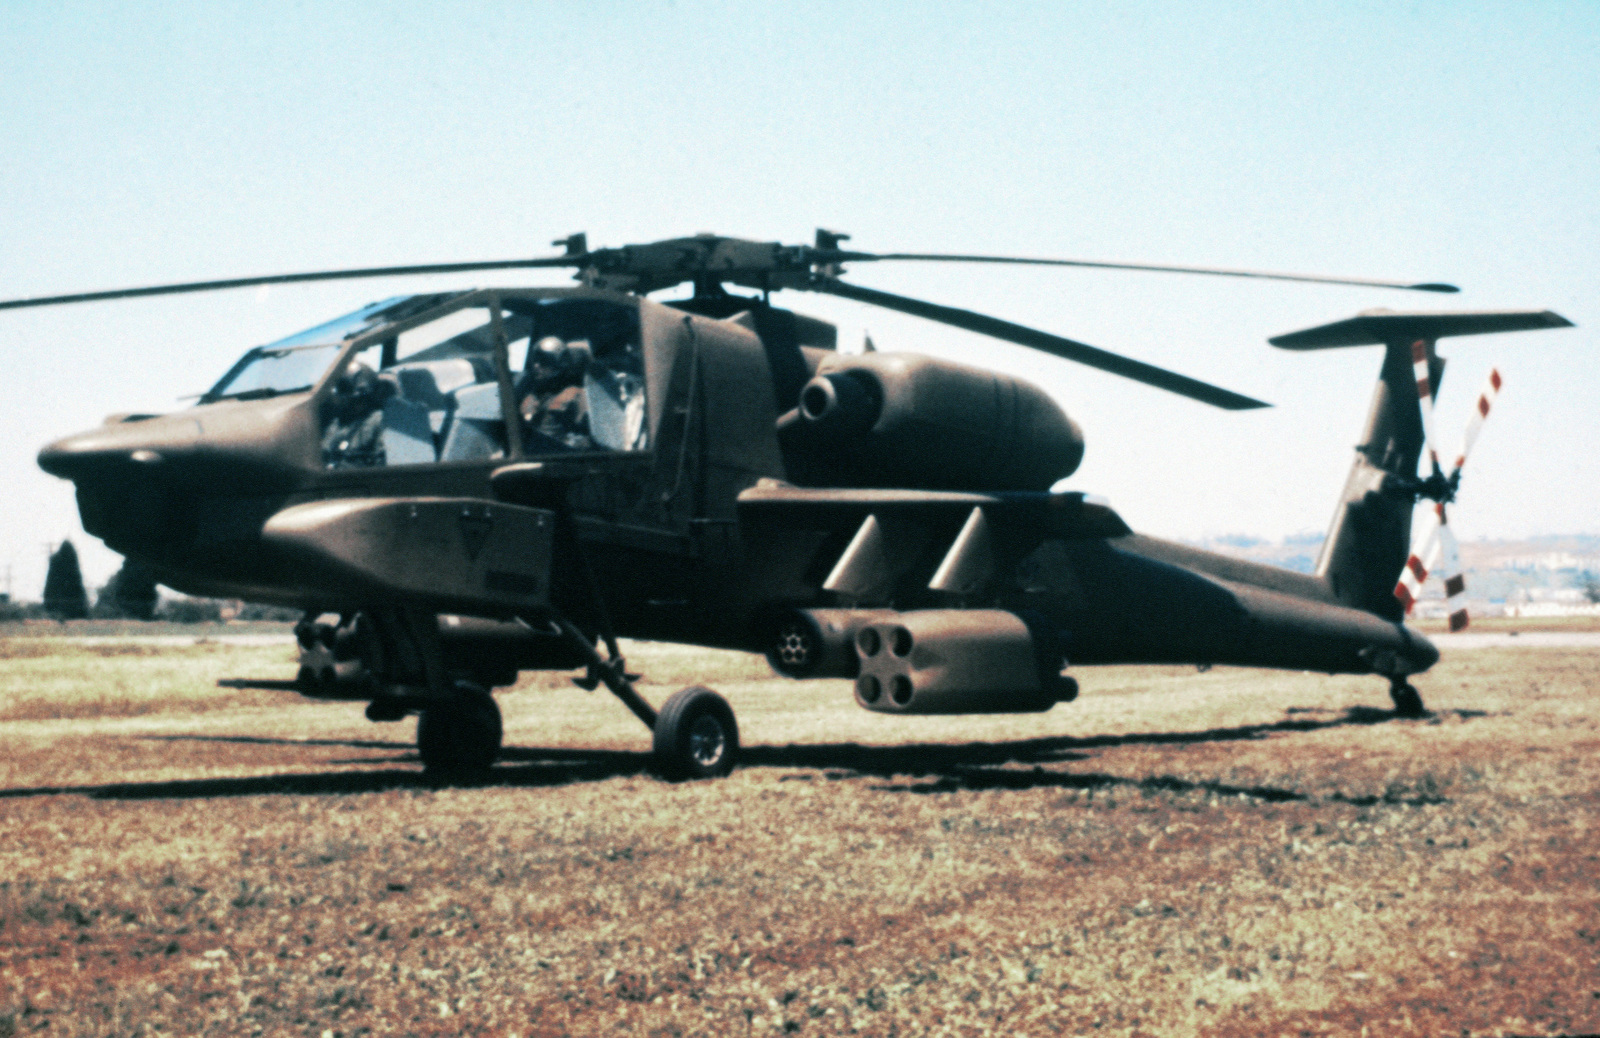 a-left-side-view-of-a-prototype-of-the-ah-64-apache-helicopter-substandard-1557c7-1600.jpg